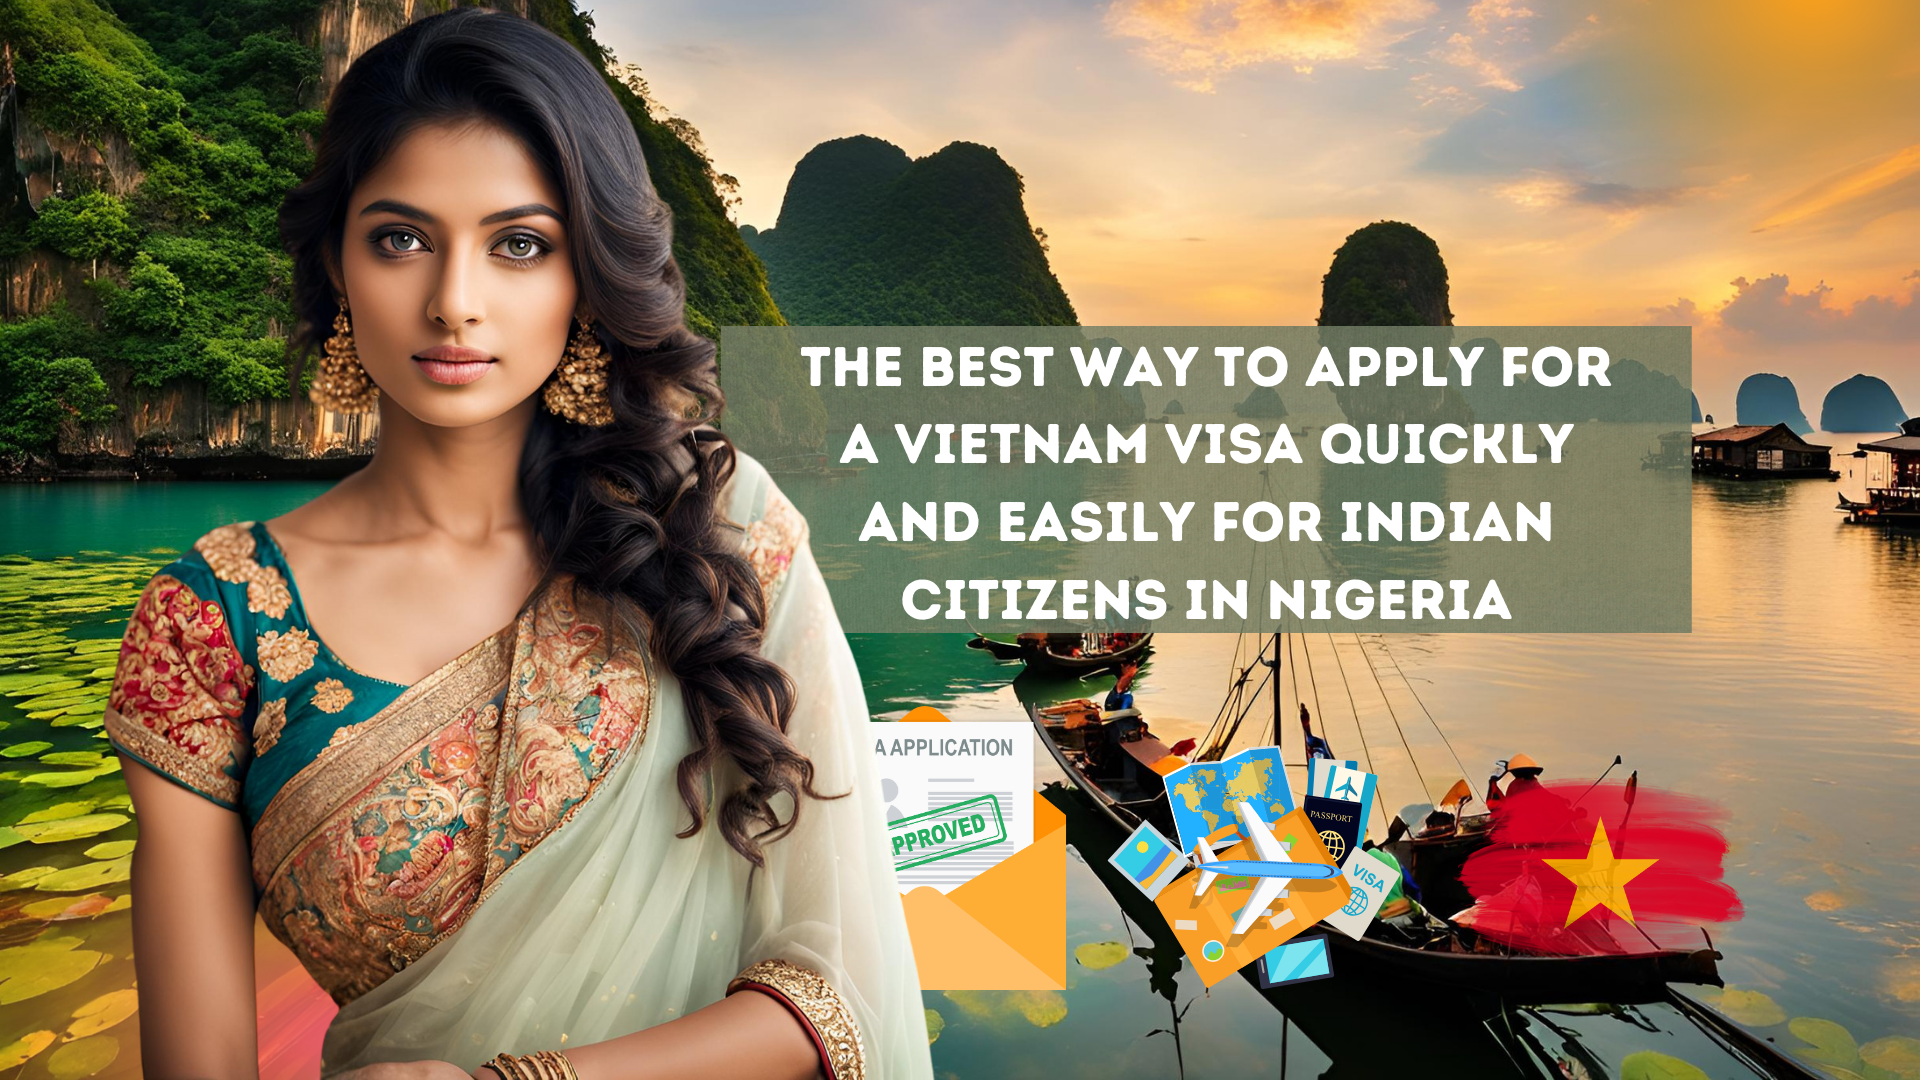 The best way to apply for a Vietnam visa quickly and easily for Indian citizens in Nigeria